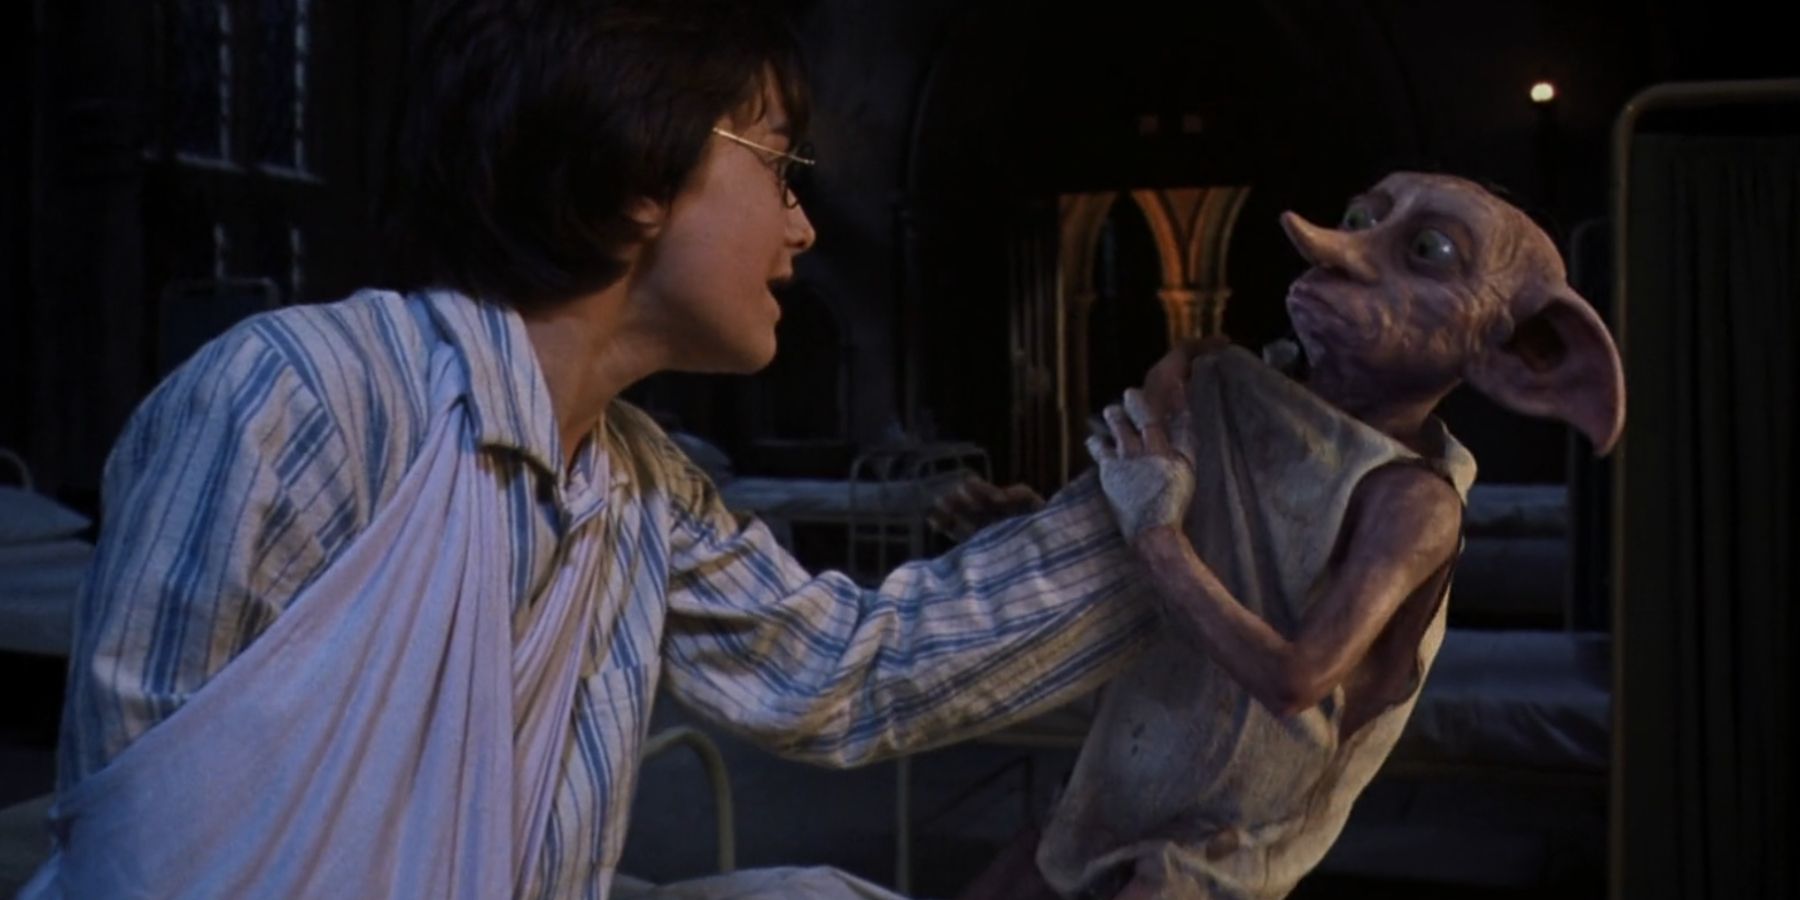 Who sent Dobby to help Harry? Wasn't Dobby a servant to the Malfoys? - Quora